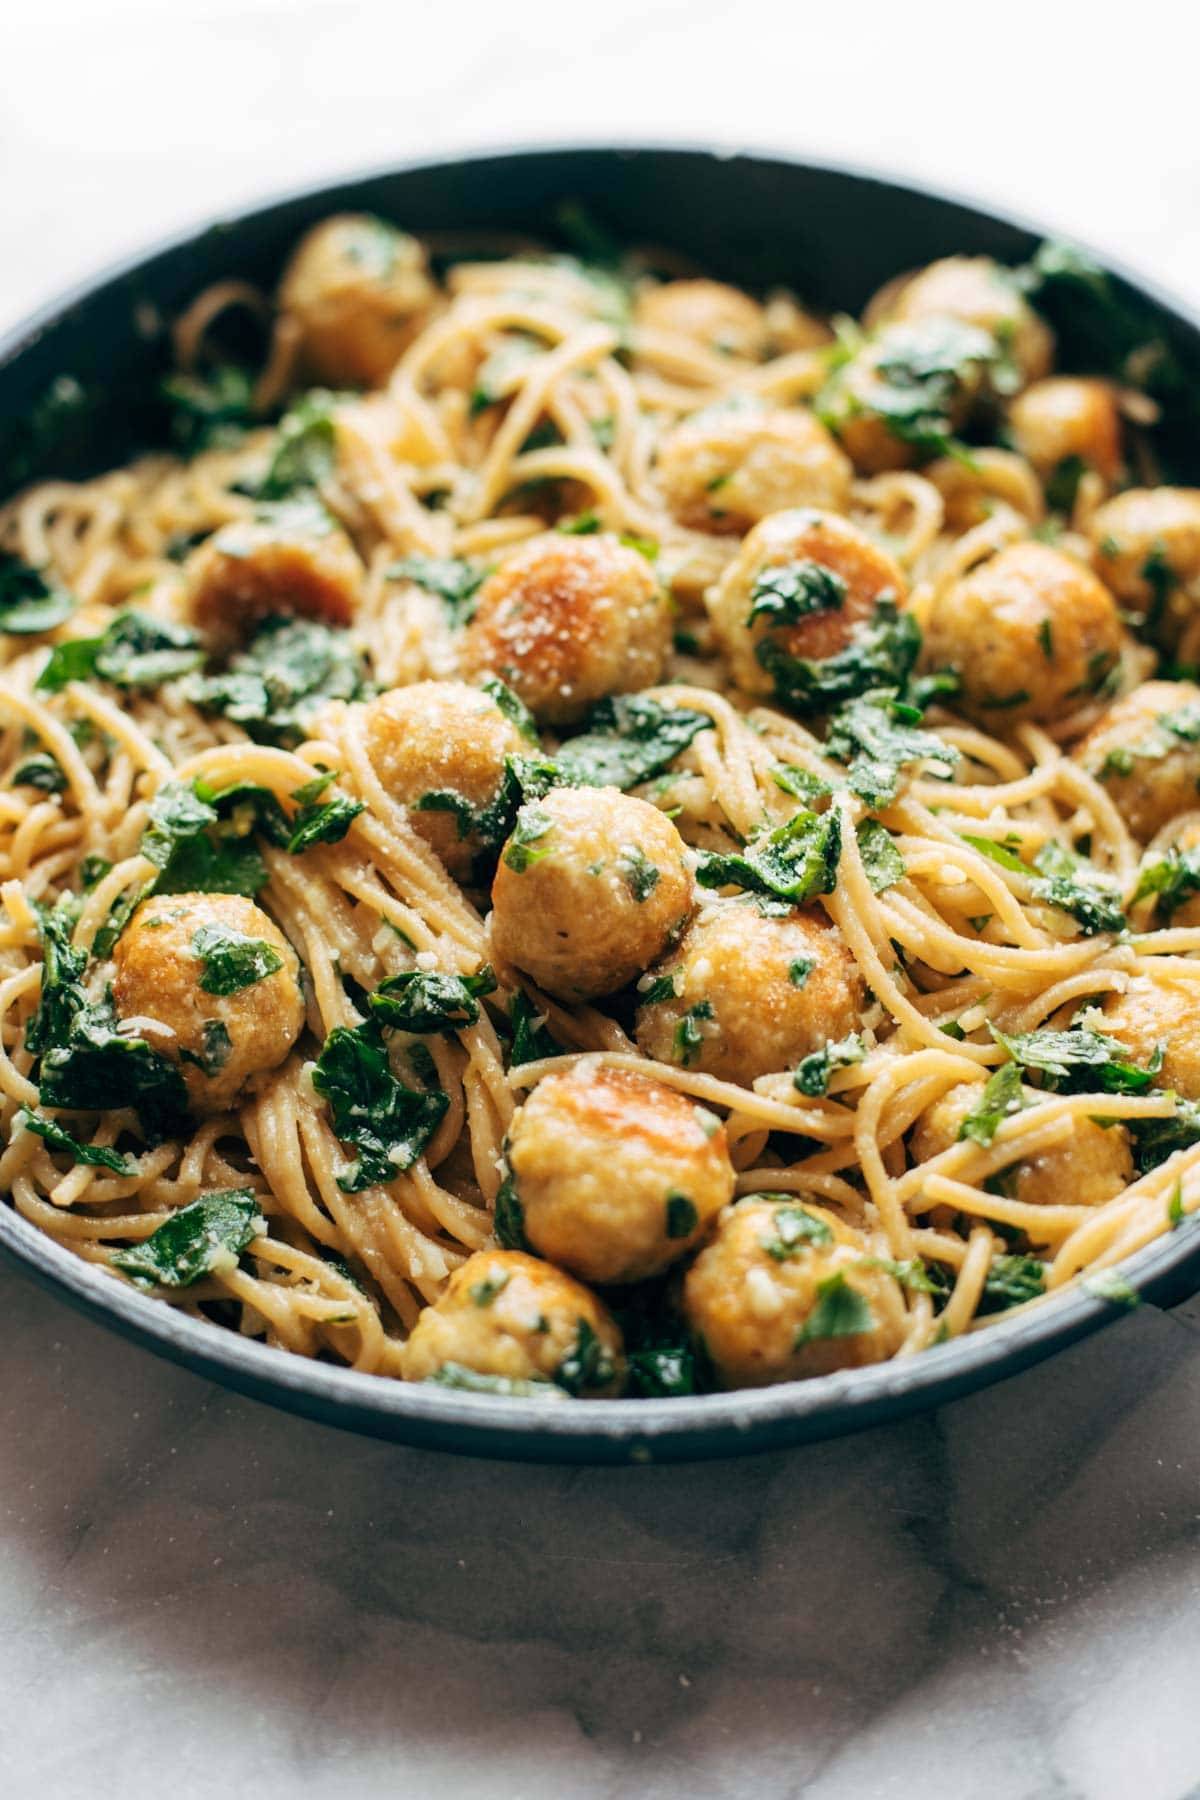 Garlic Herb Spaghetti with Baked Chicken Meatballs in a pan.